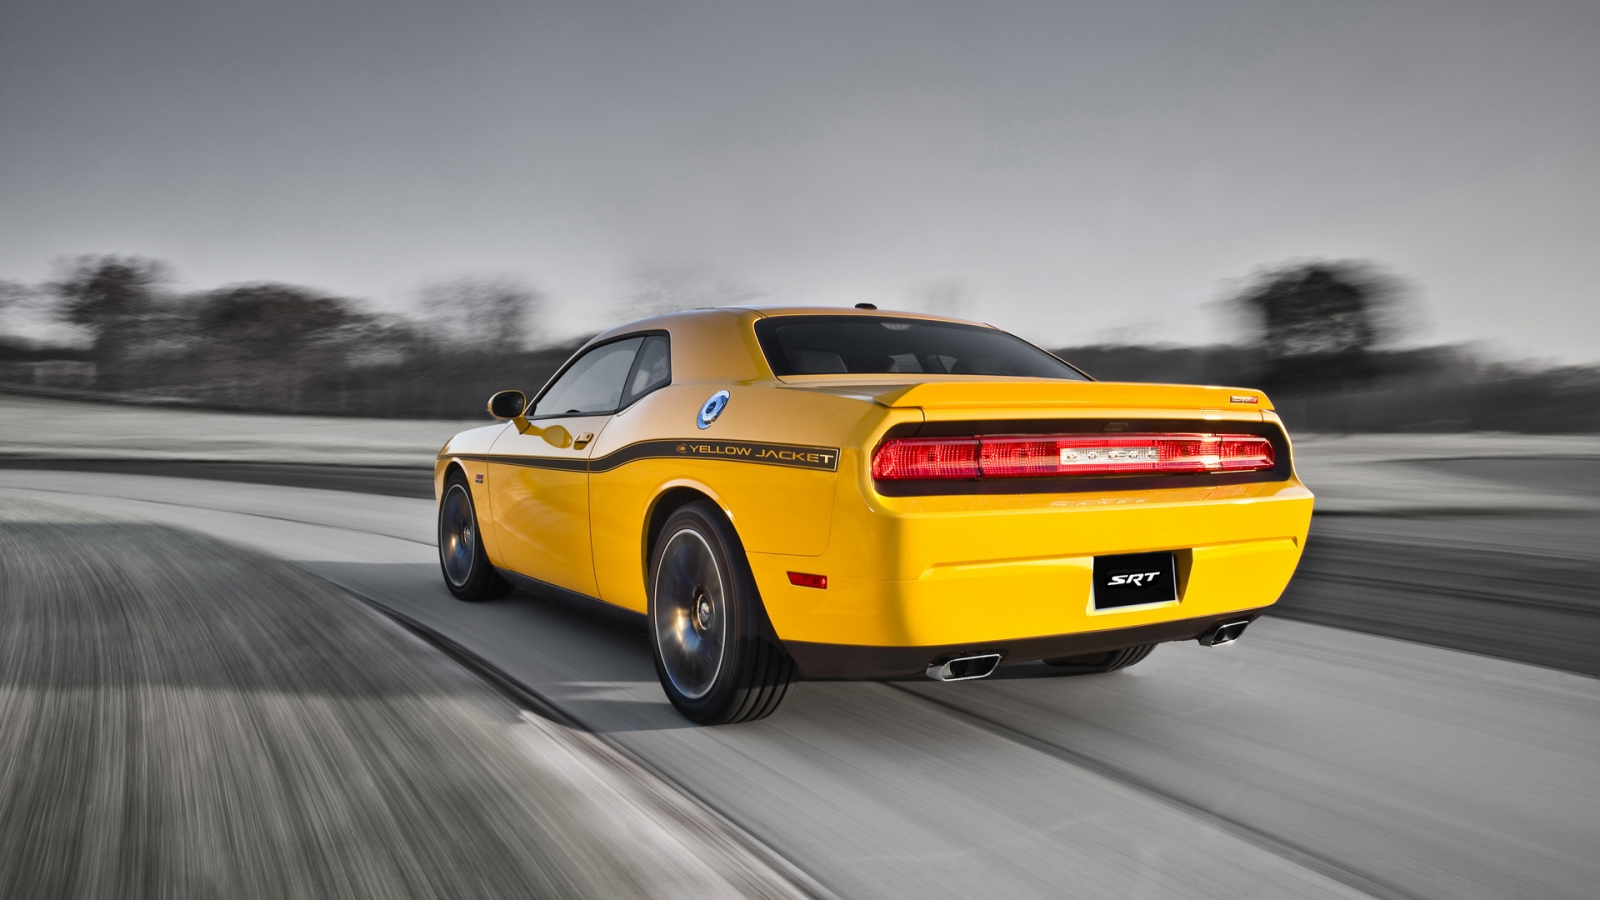 Dodge Challenger Yellow Jacket for 1600 x 900 HDTV resolution